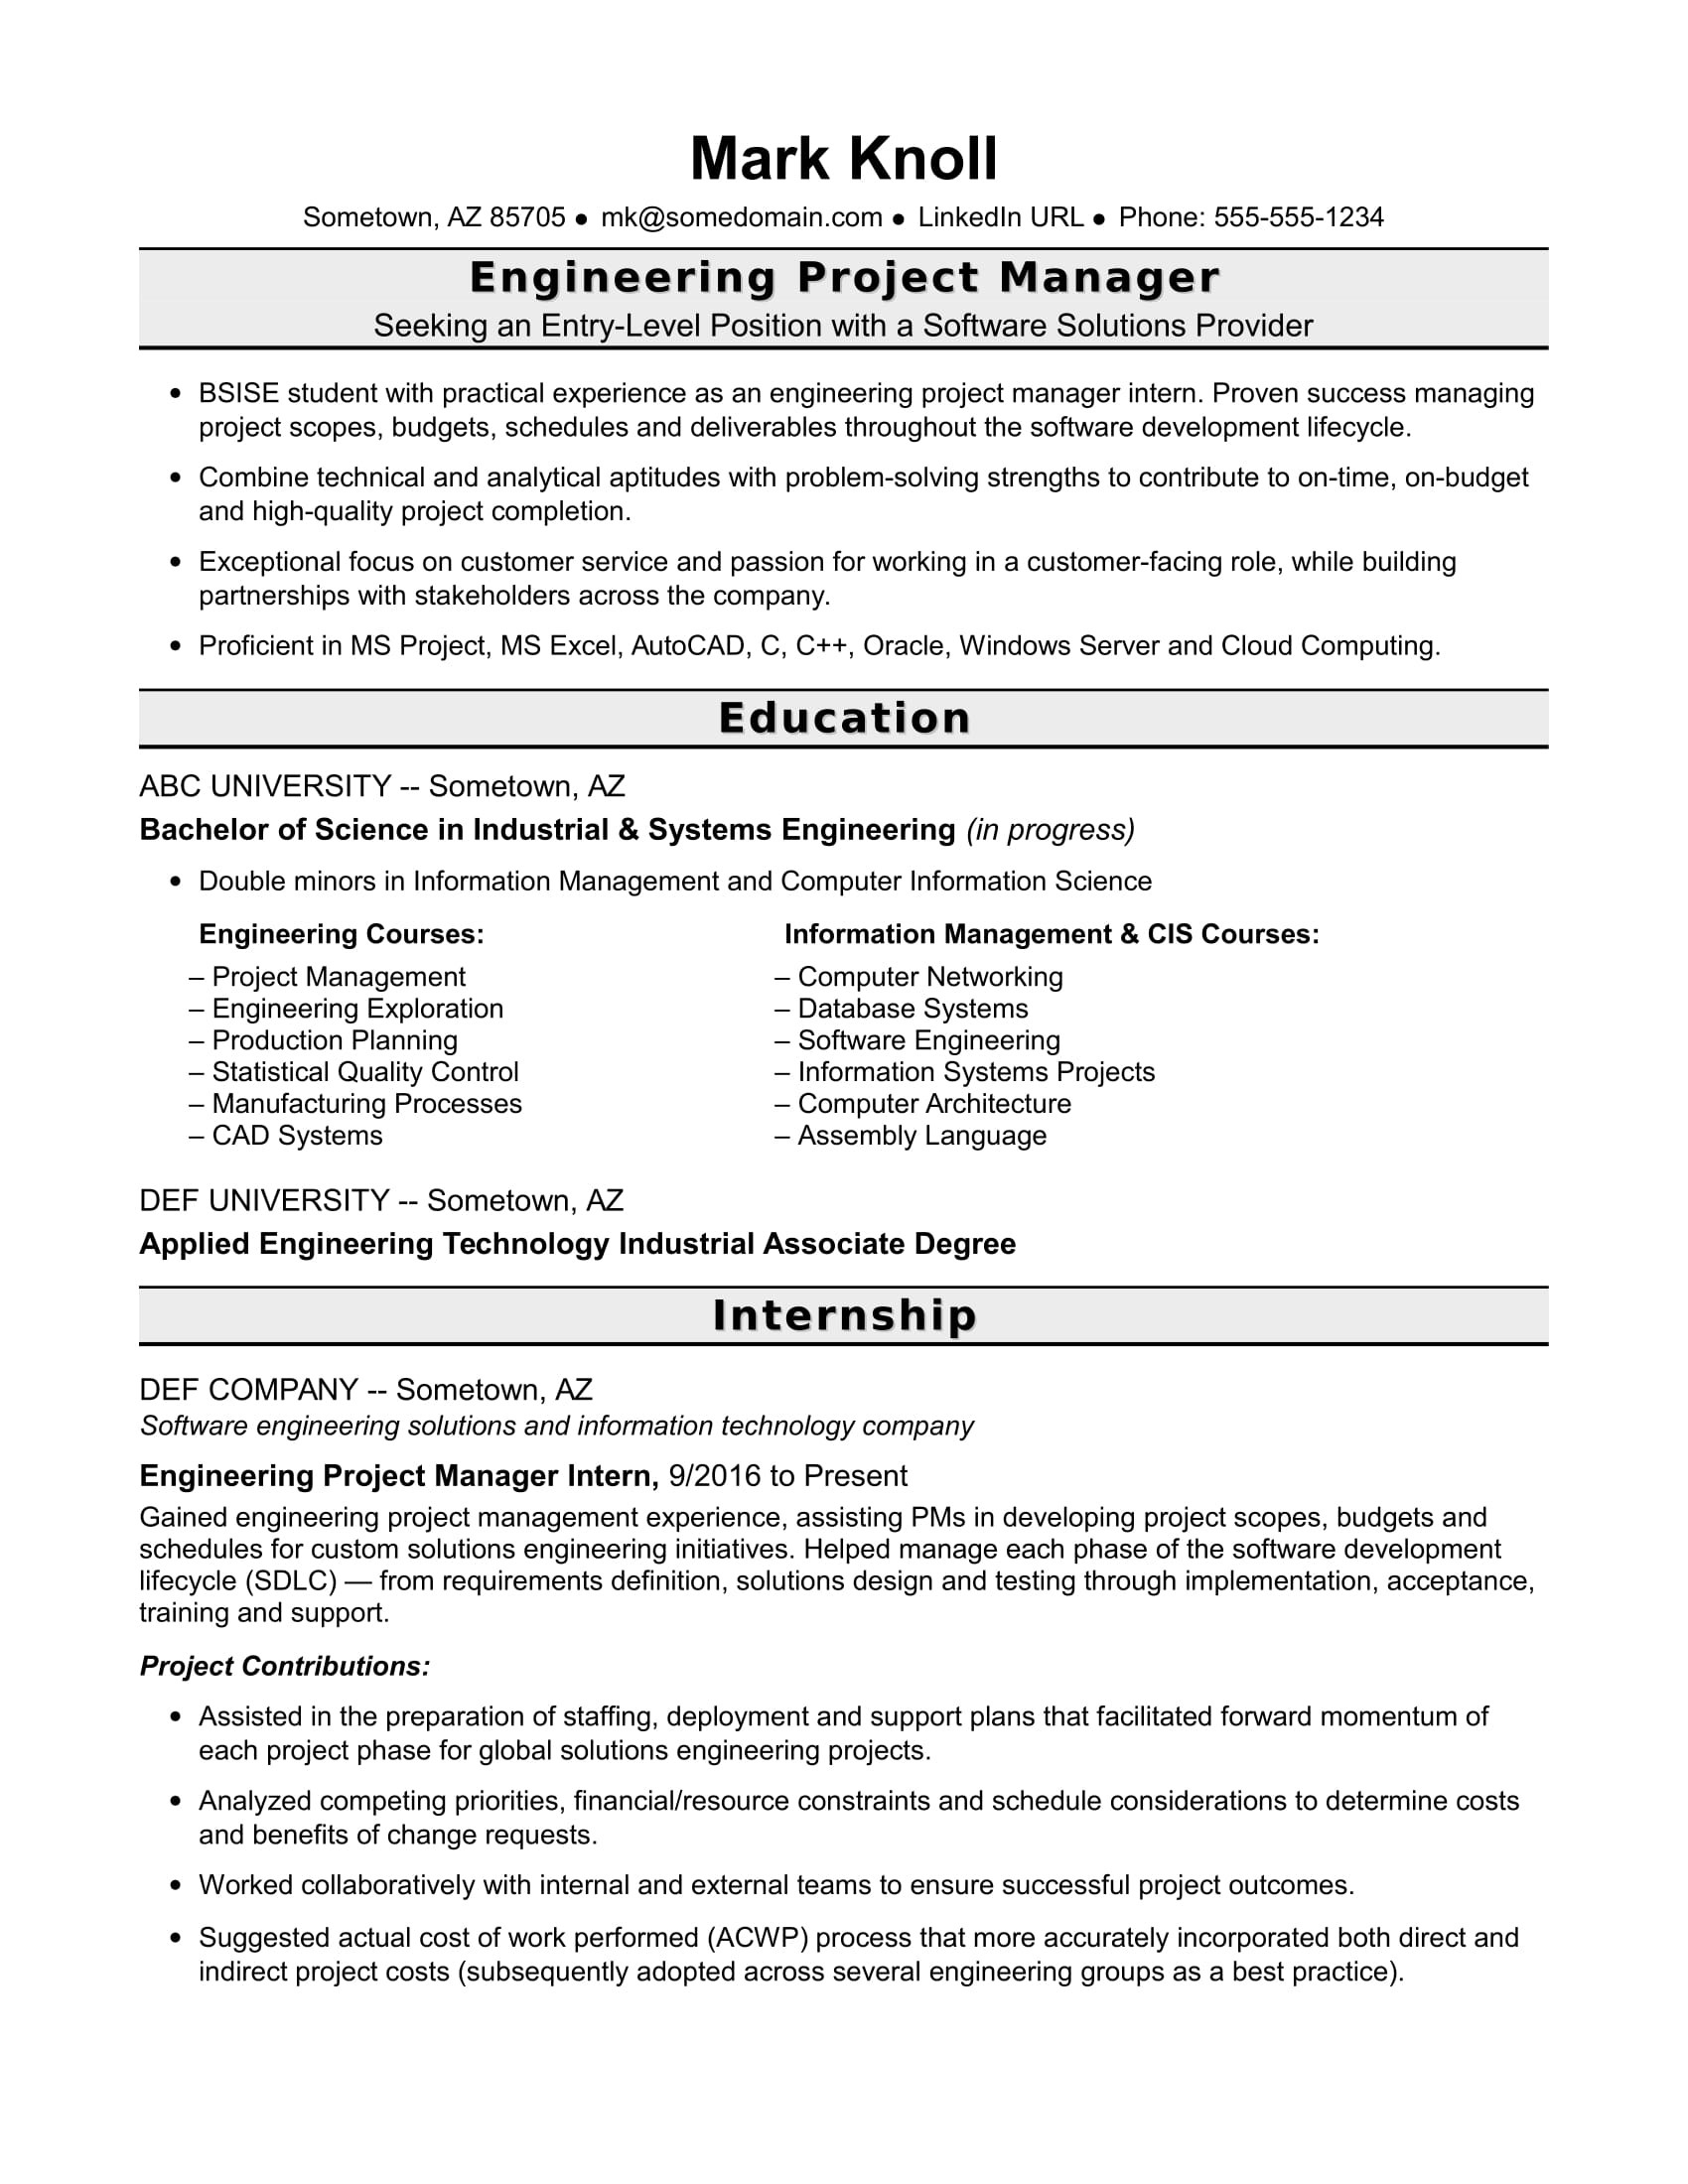 Sample Resume for It Director Position Entry-level Project Manager Resume for Engineers Monster.com